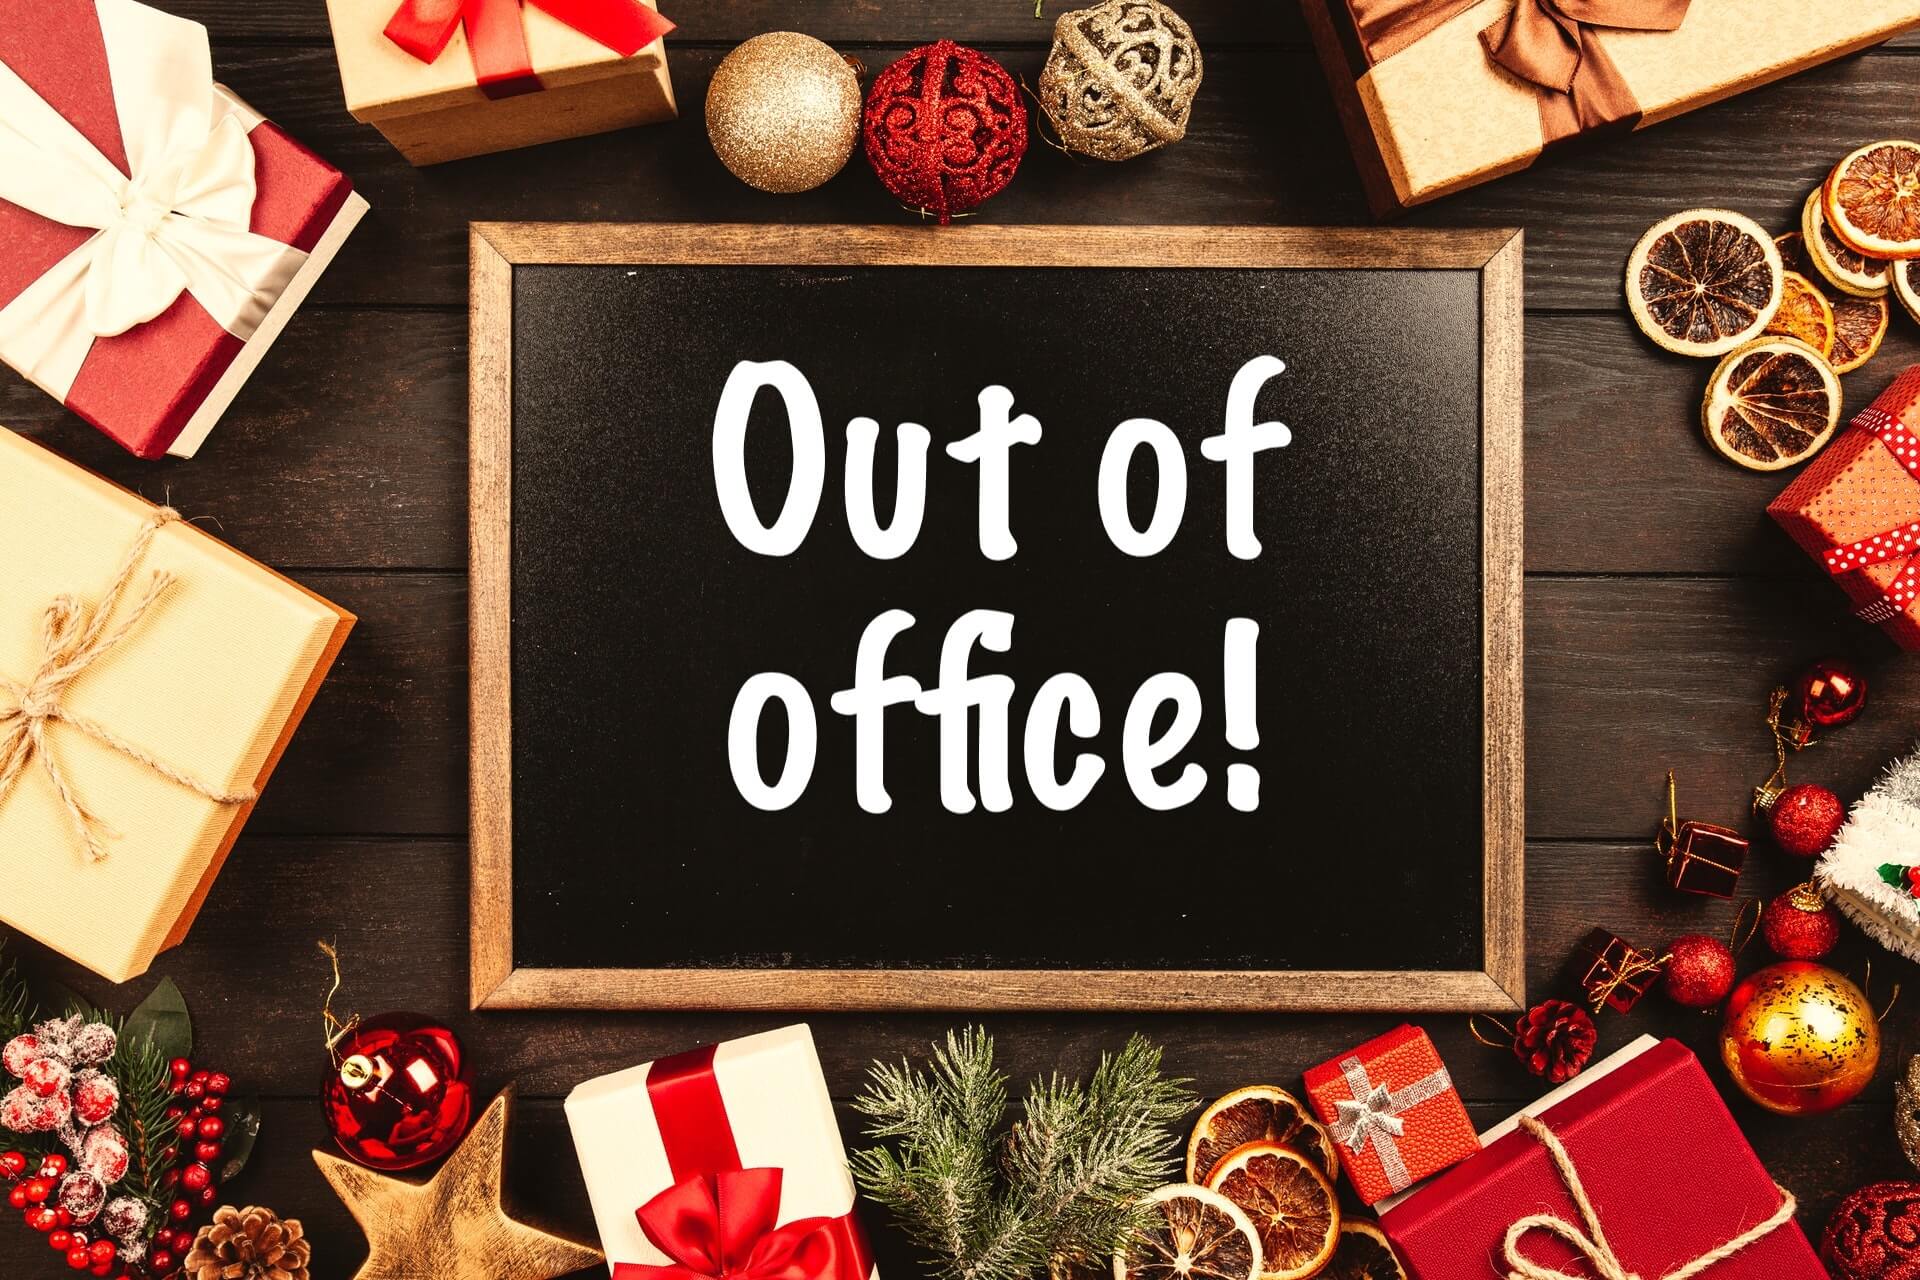 5 tips to clear your desk for Christmas